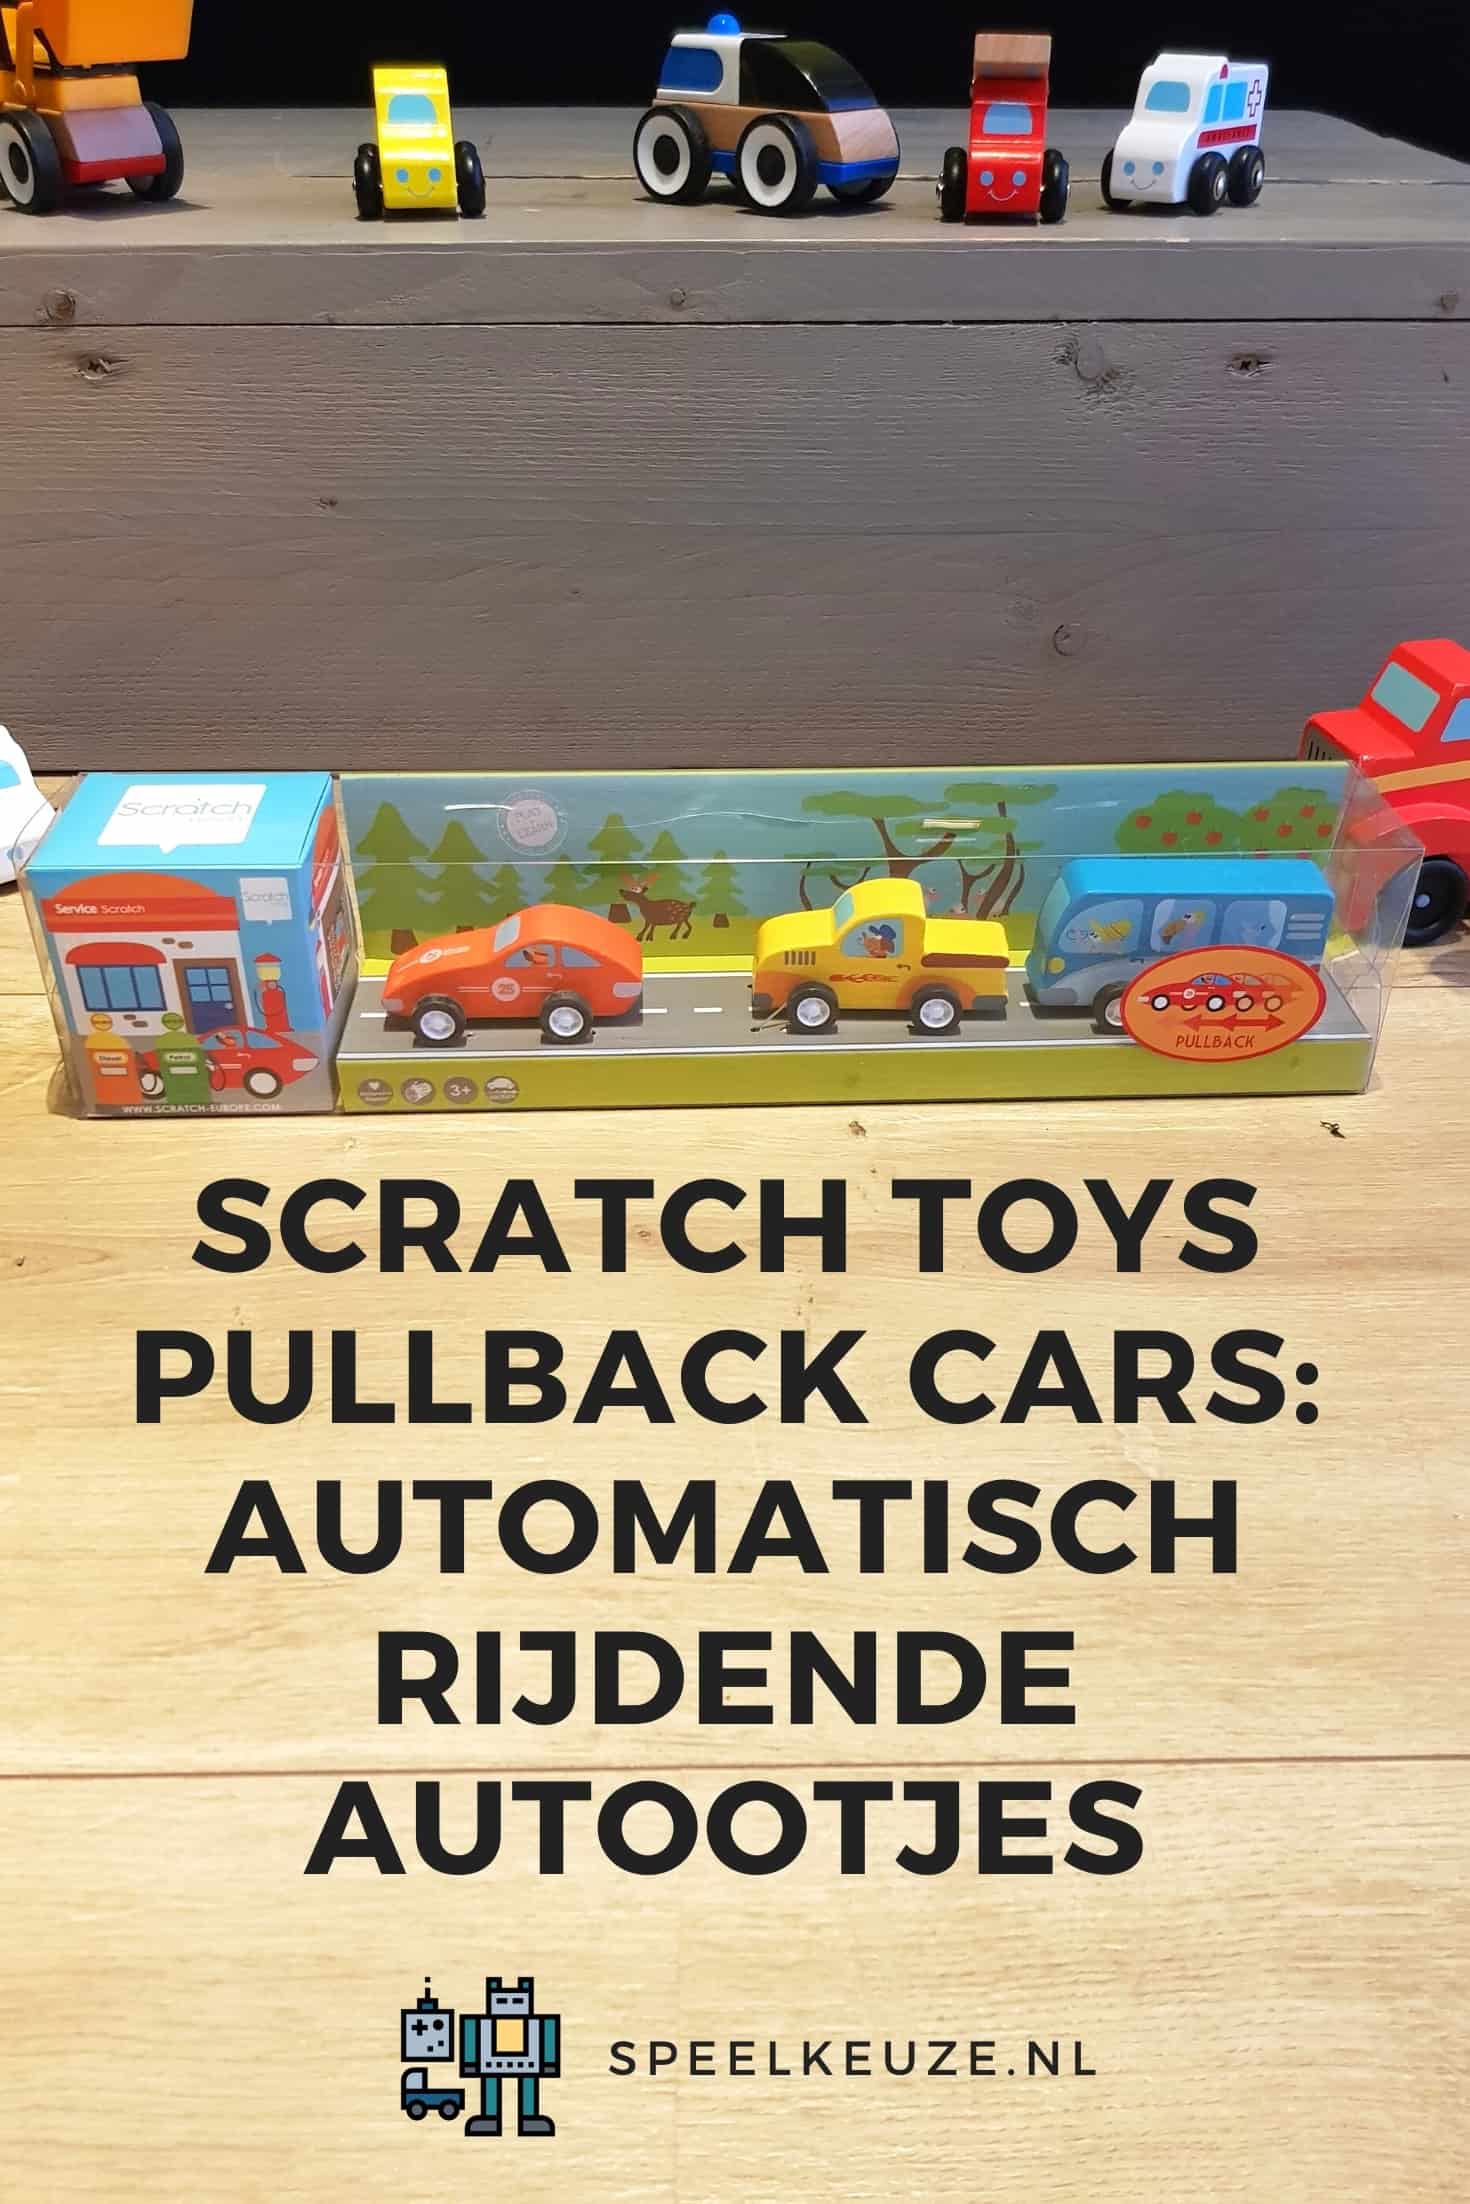 Scratch toys pullback cars: automatic driving cars